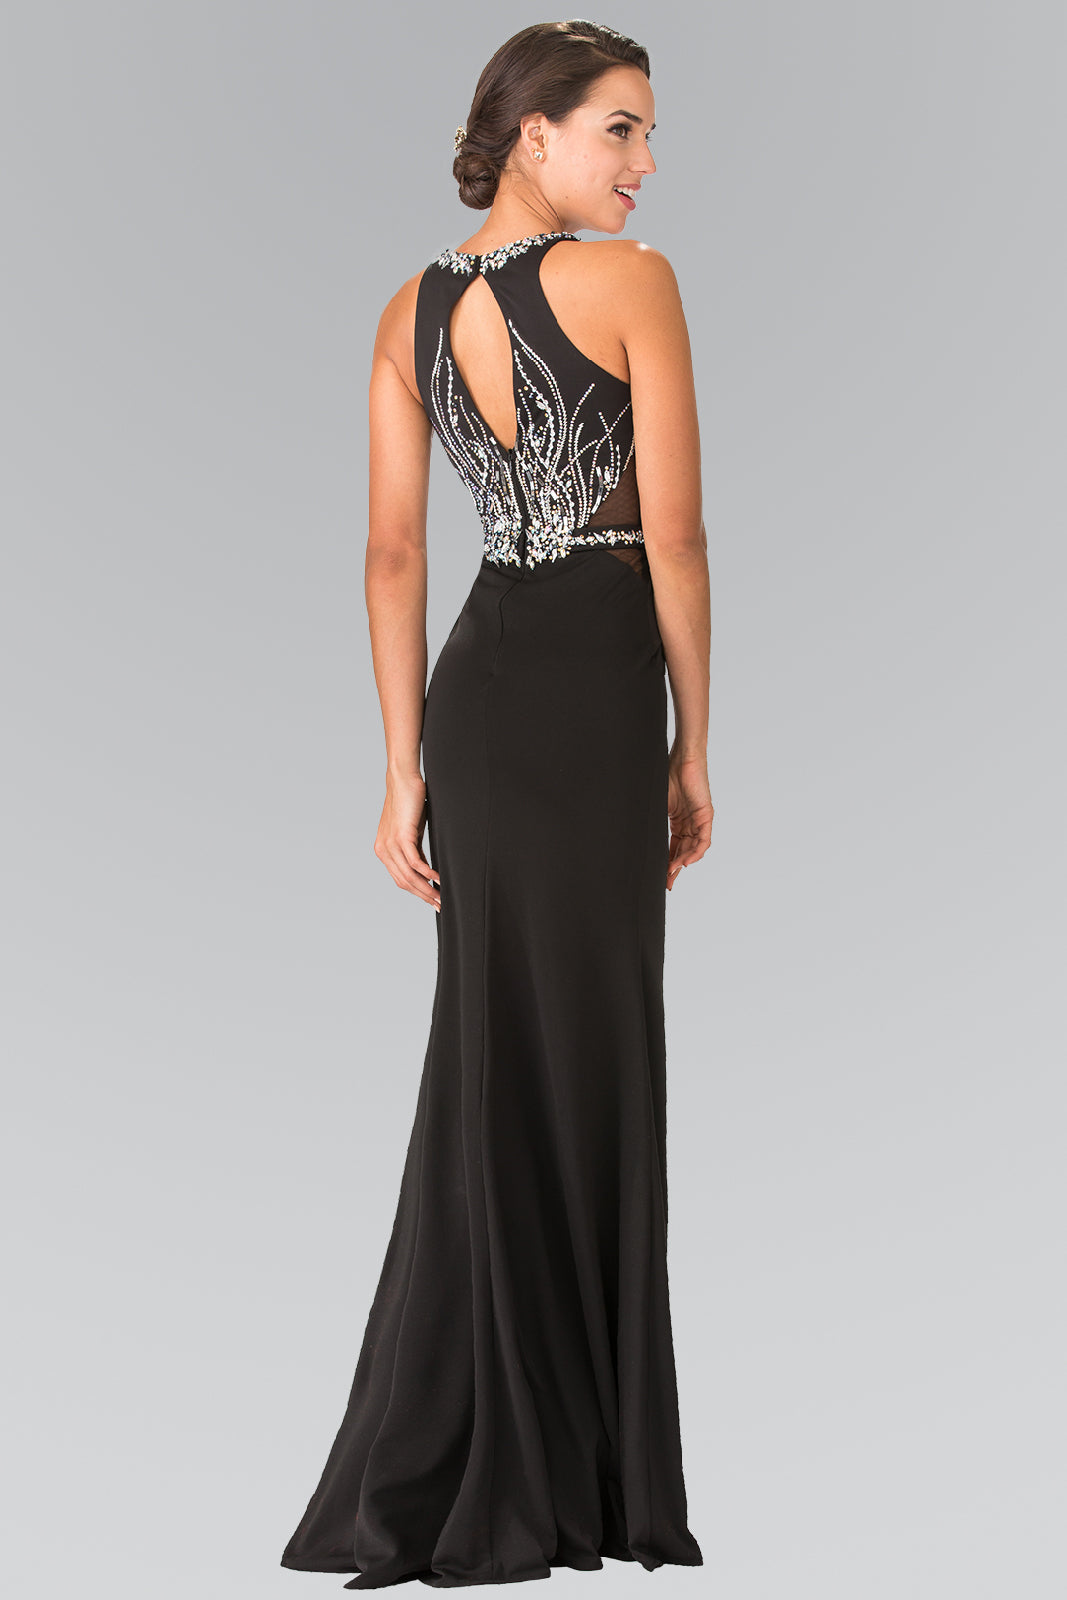 Beads Embellished Long Dress with Sheer Sides-smcdress